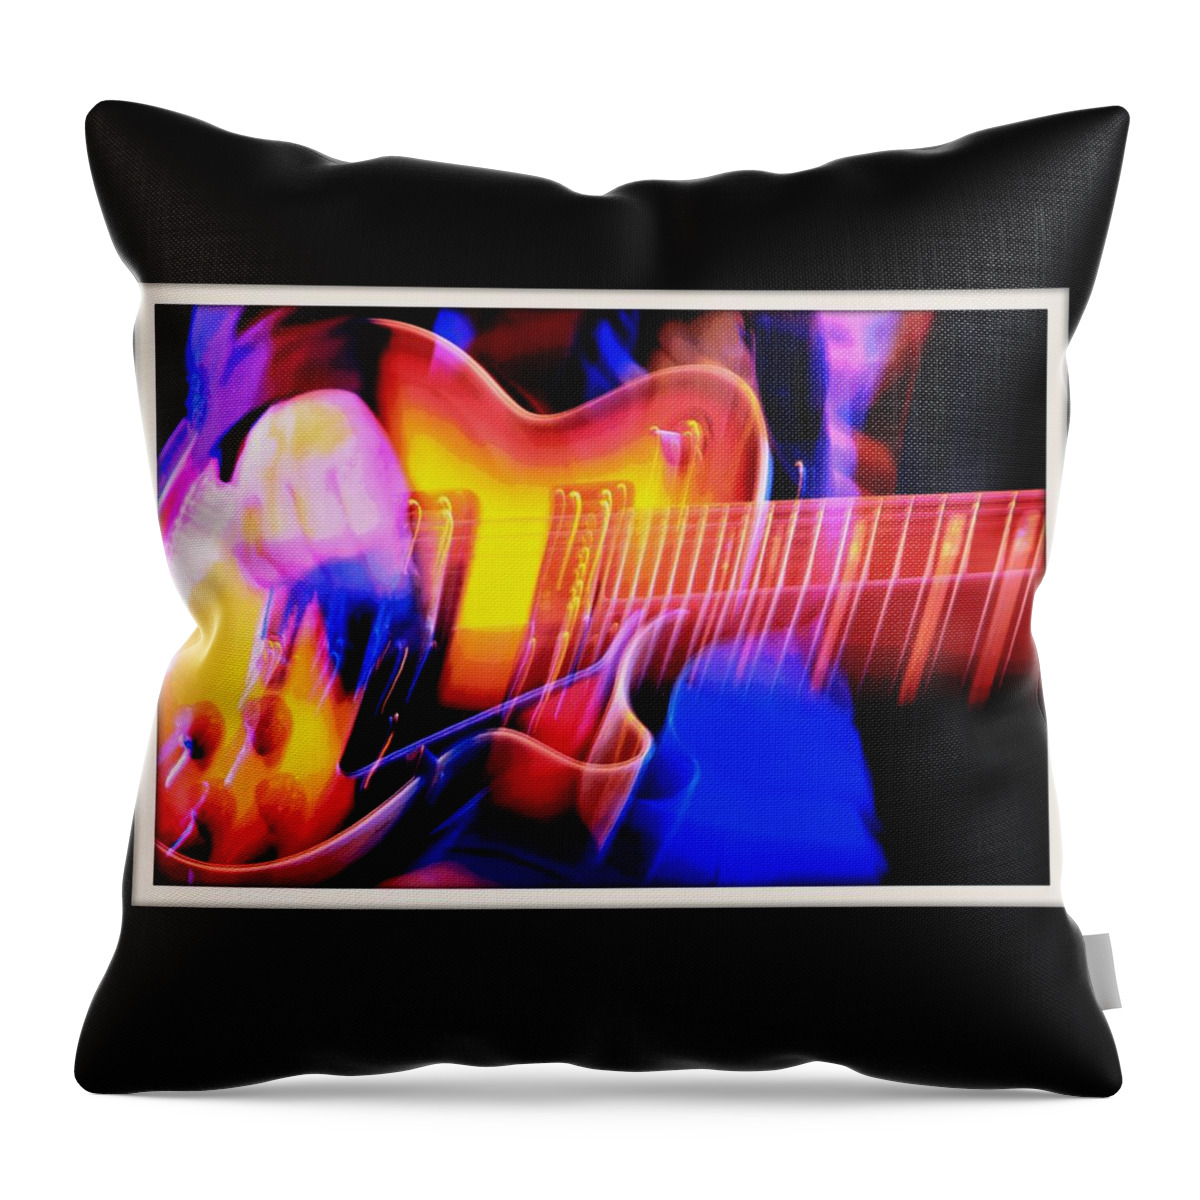 Home Throw Pillow featuring the photograph Live Music by Chris Berry